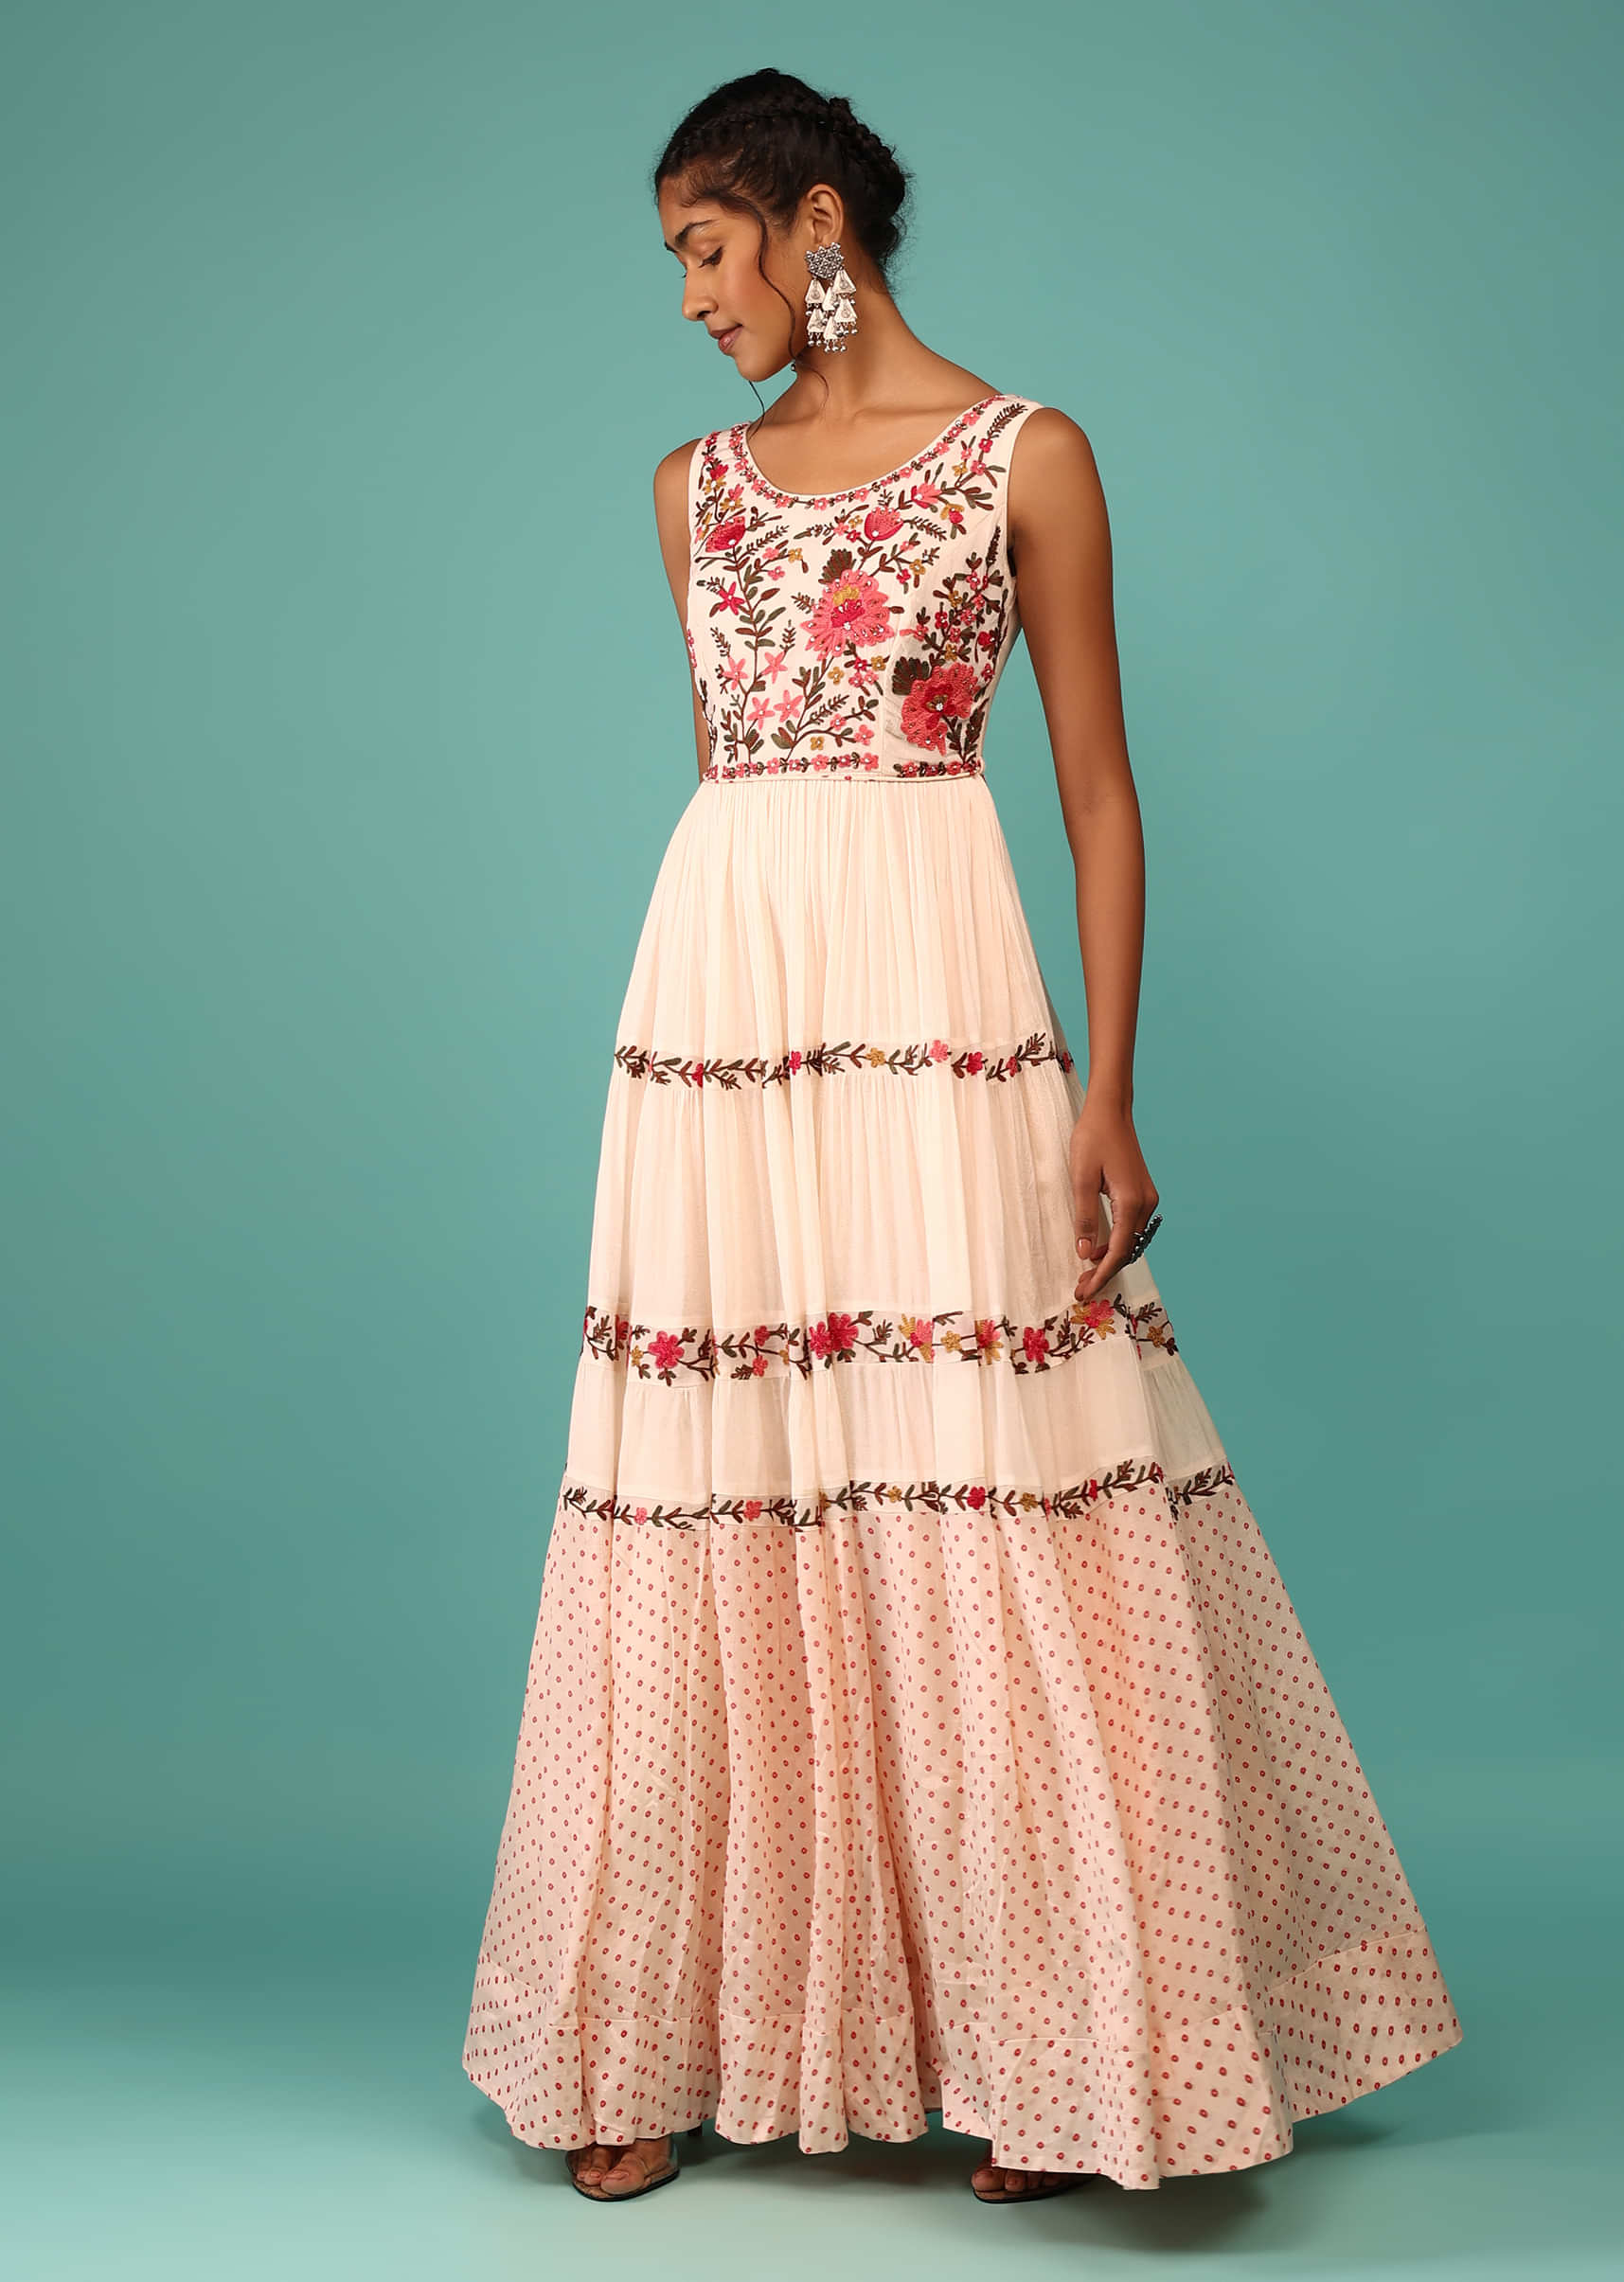 Candy Pink Flowy Dress In Chiffon With Floral Kashmiri Thread Work And Embroidery